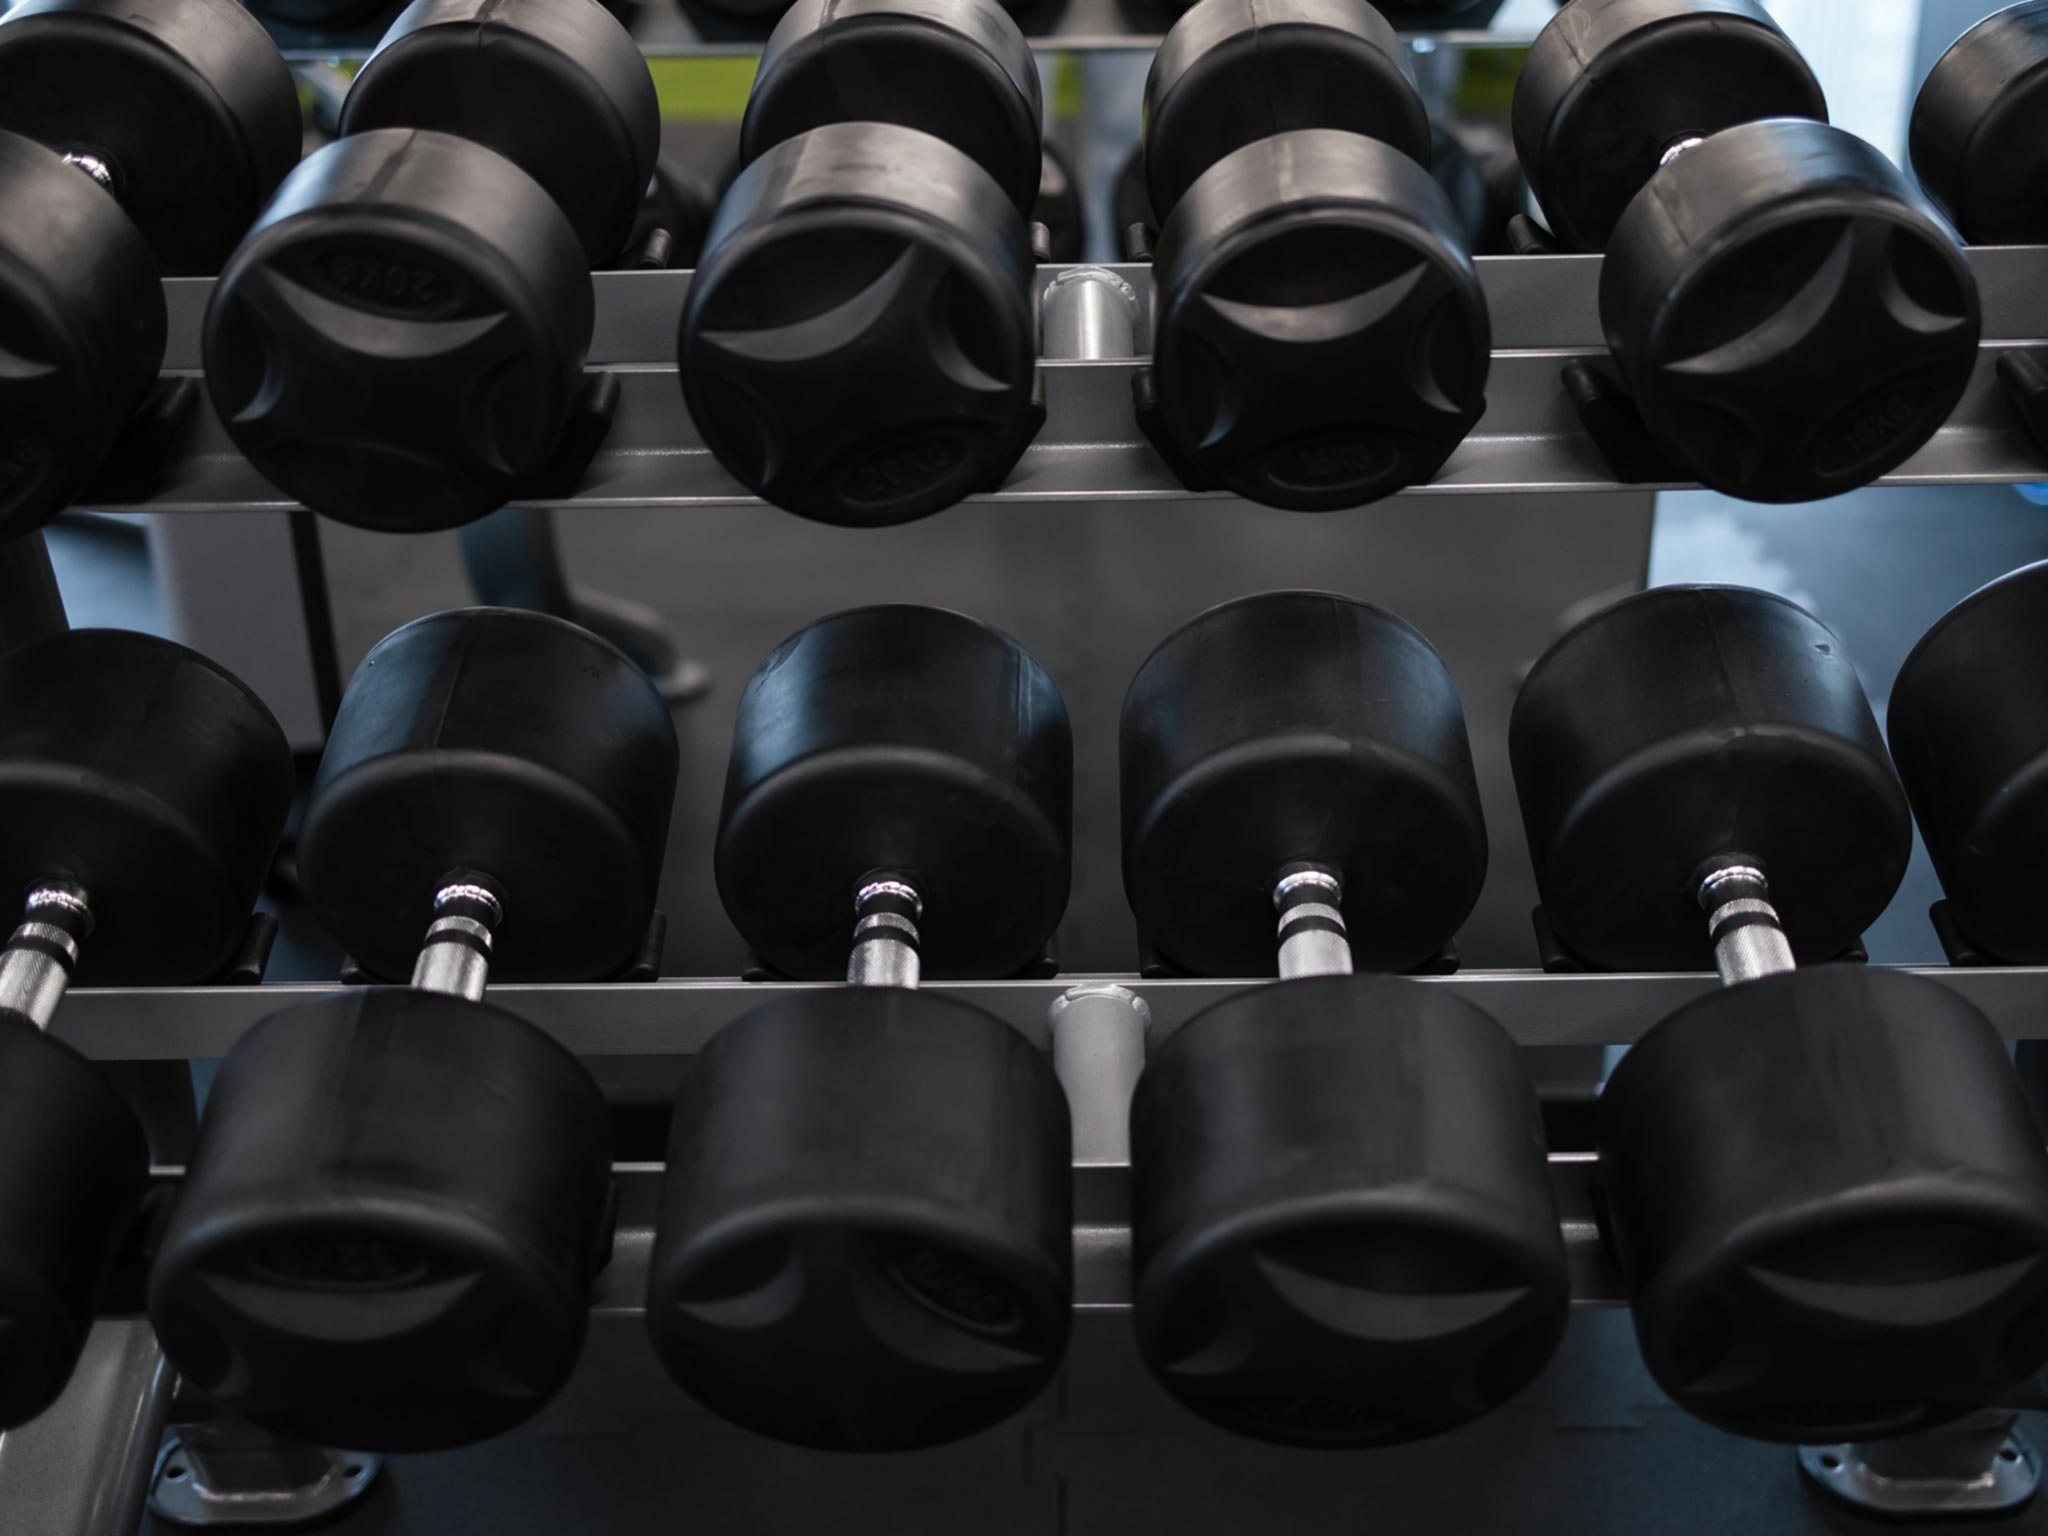 Light Weights vs Heavy Weights for Muscle Growth: Which is Better? (Science Based)